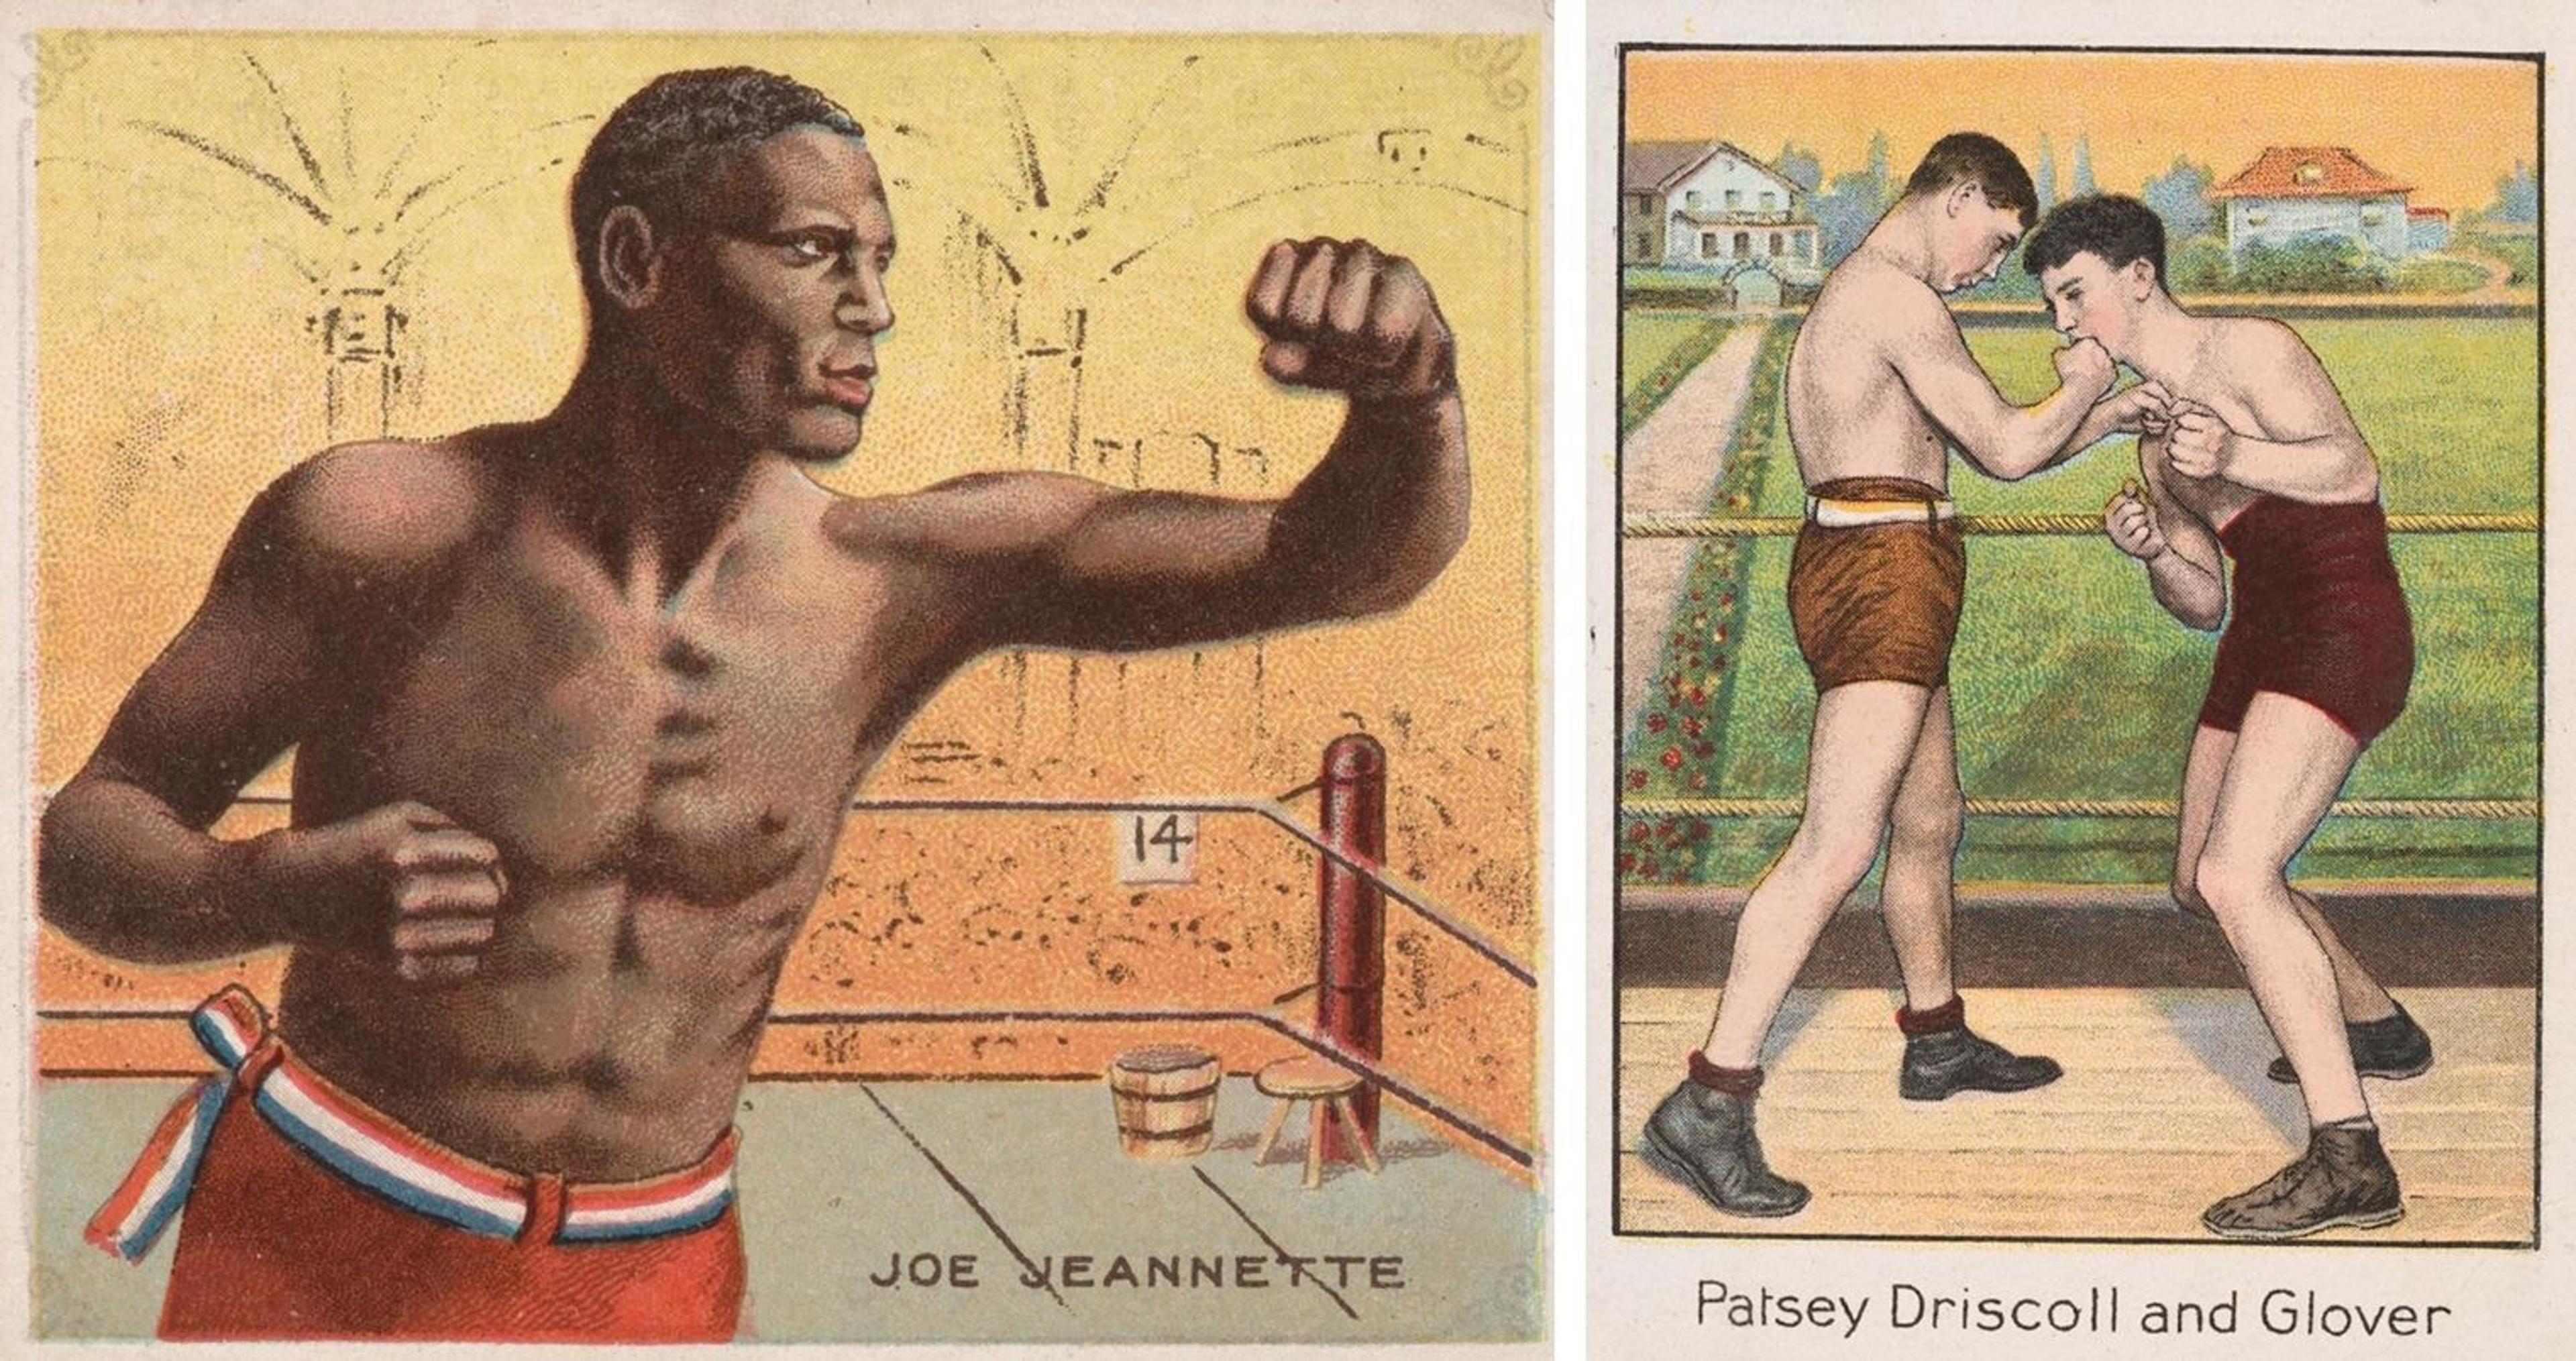 Two boxing cards from 1910, one depicting Joe Jeannette, and another depicting a fight between Patsey Driscoll and Glover